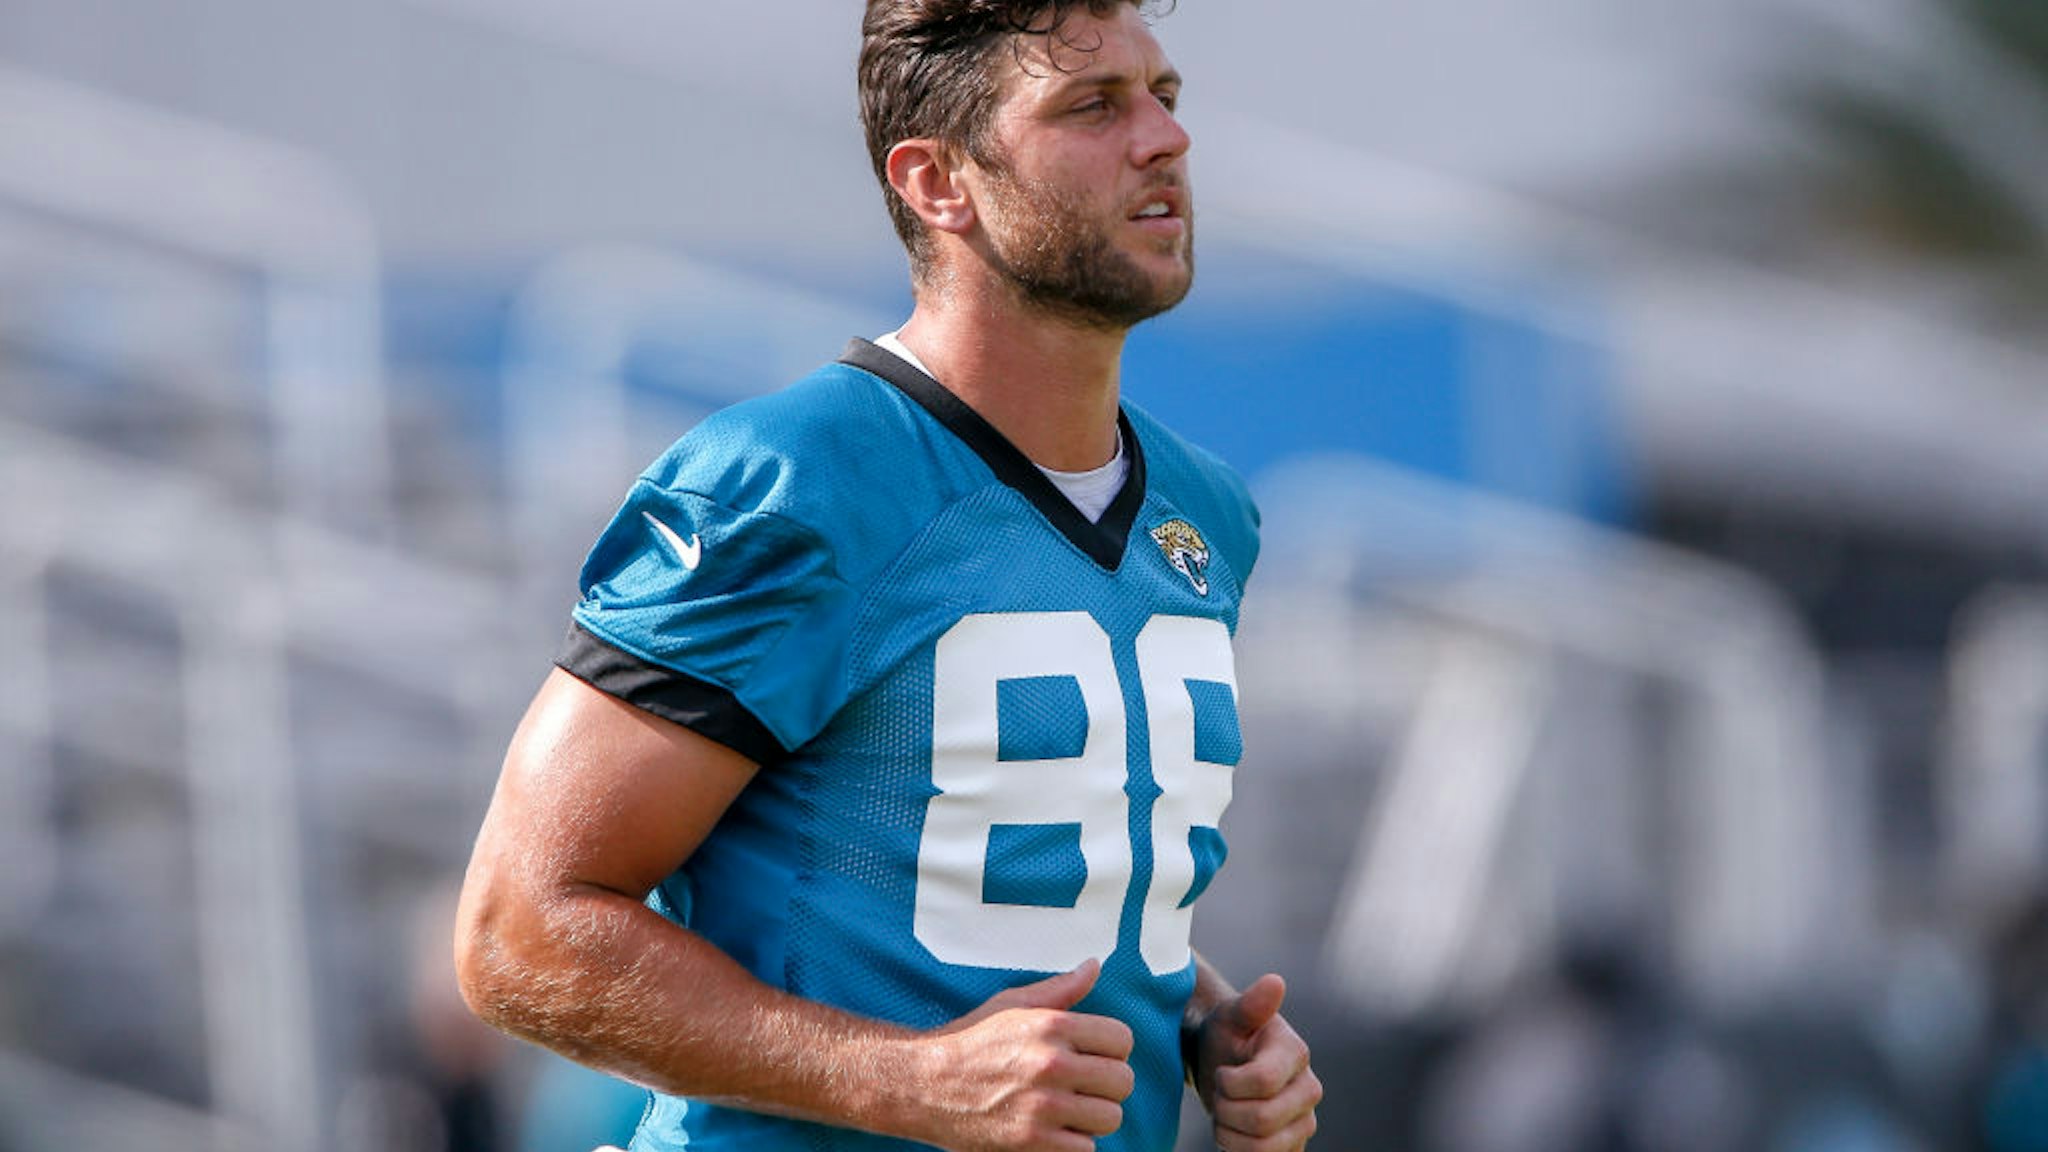 Tight End Tyler Eifert #88 of the Jacksonville Jaguars works out during training camp at Dream Finders Home Practice Fields on August 12, 2020 in Jacksonville, Florida.